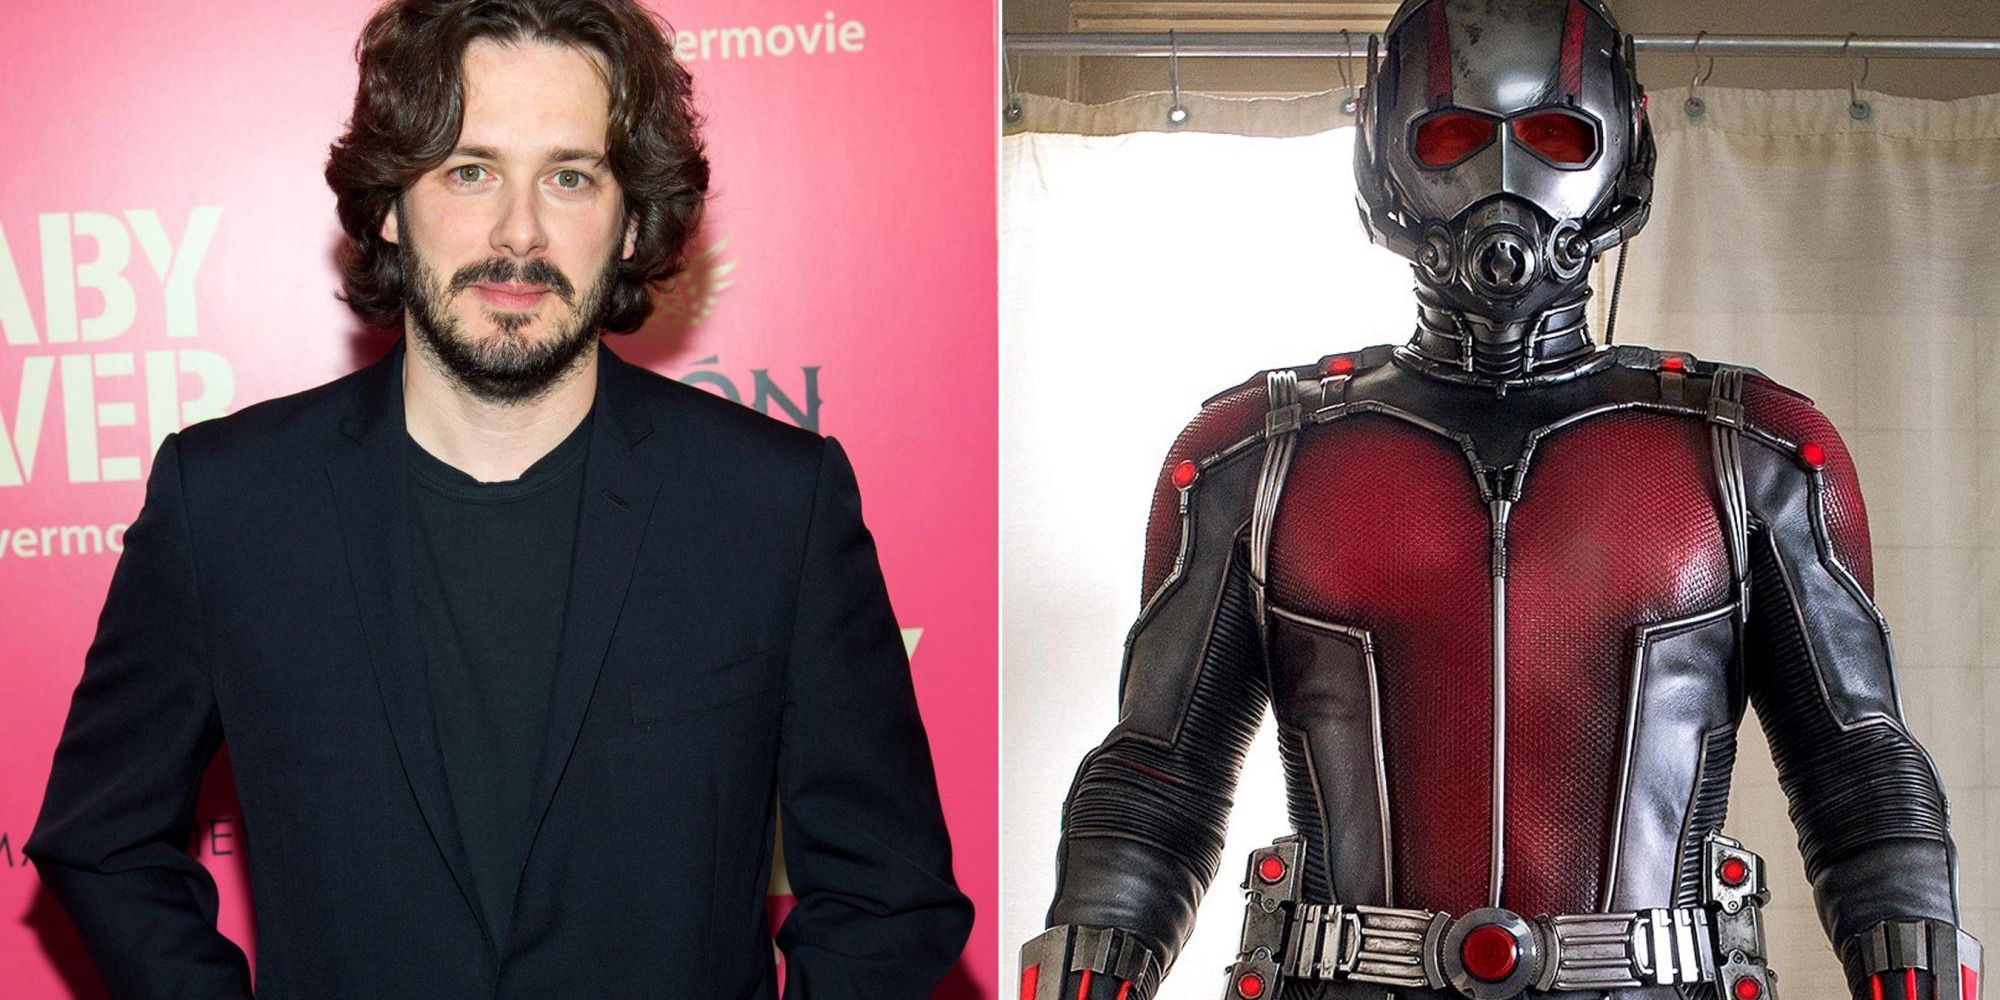 Edgar Wright and the MCUs Ant-Man